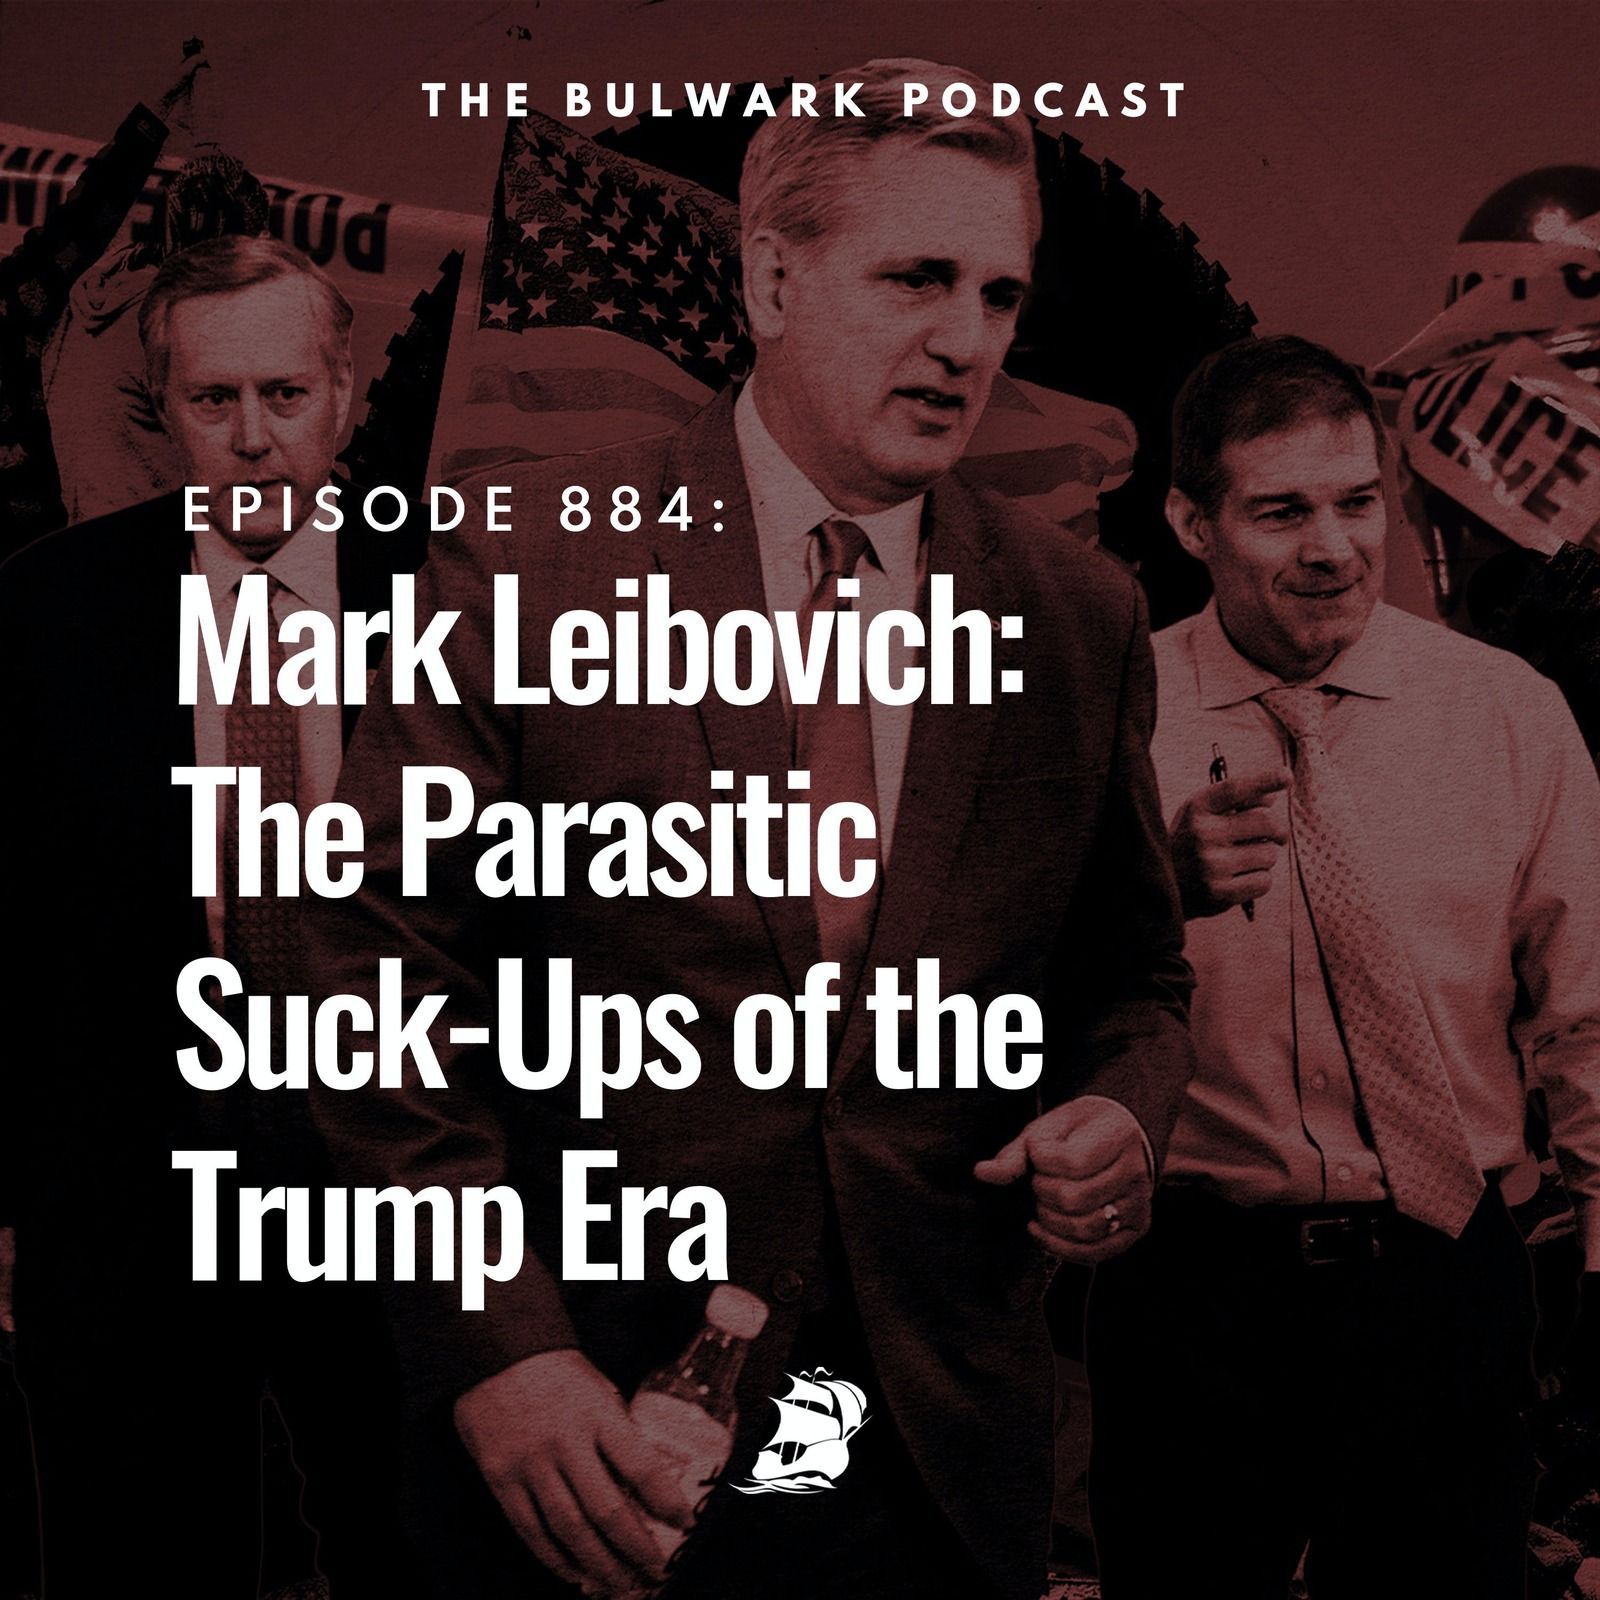 Mark Leibovich: The Parasitic Suck-Ups of the Trump Era by The Bulwark Podcast